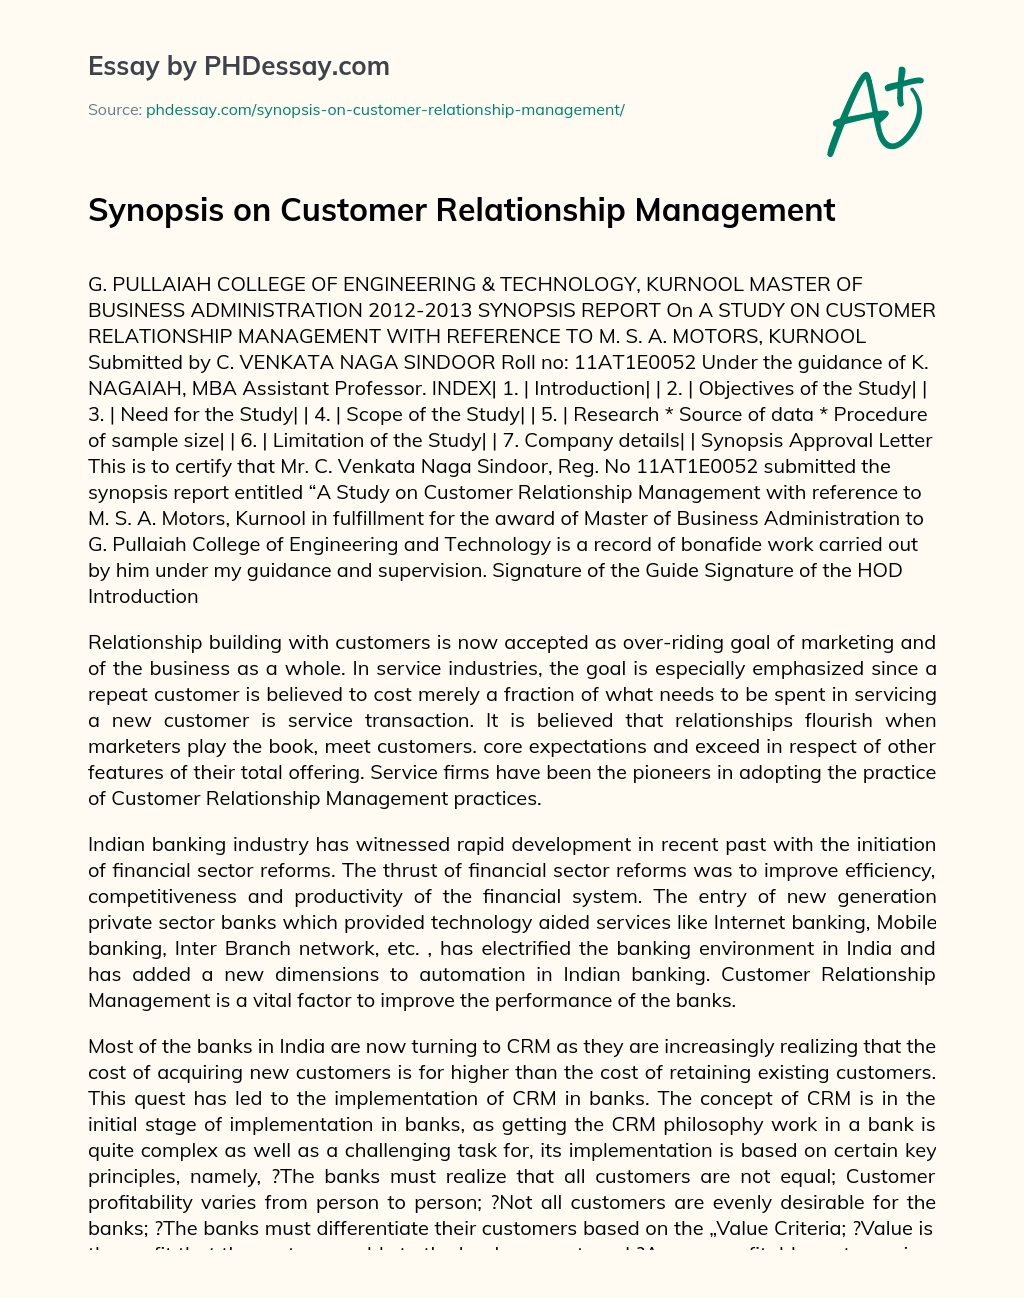 Synopsis on Customer Relationship Management essay